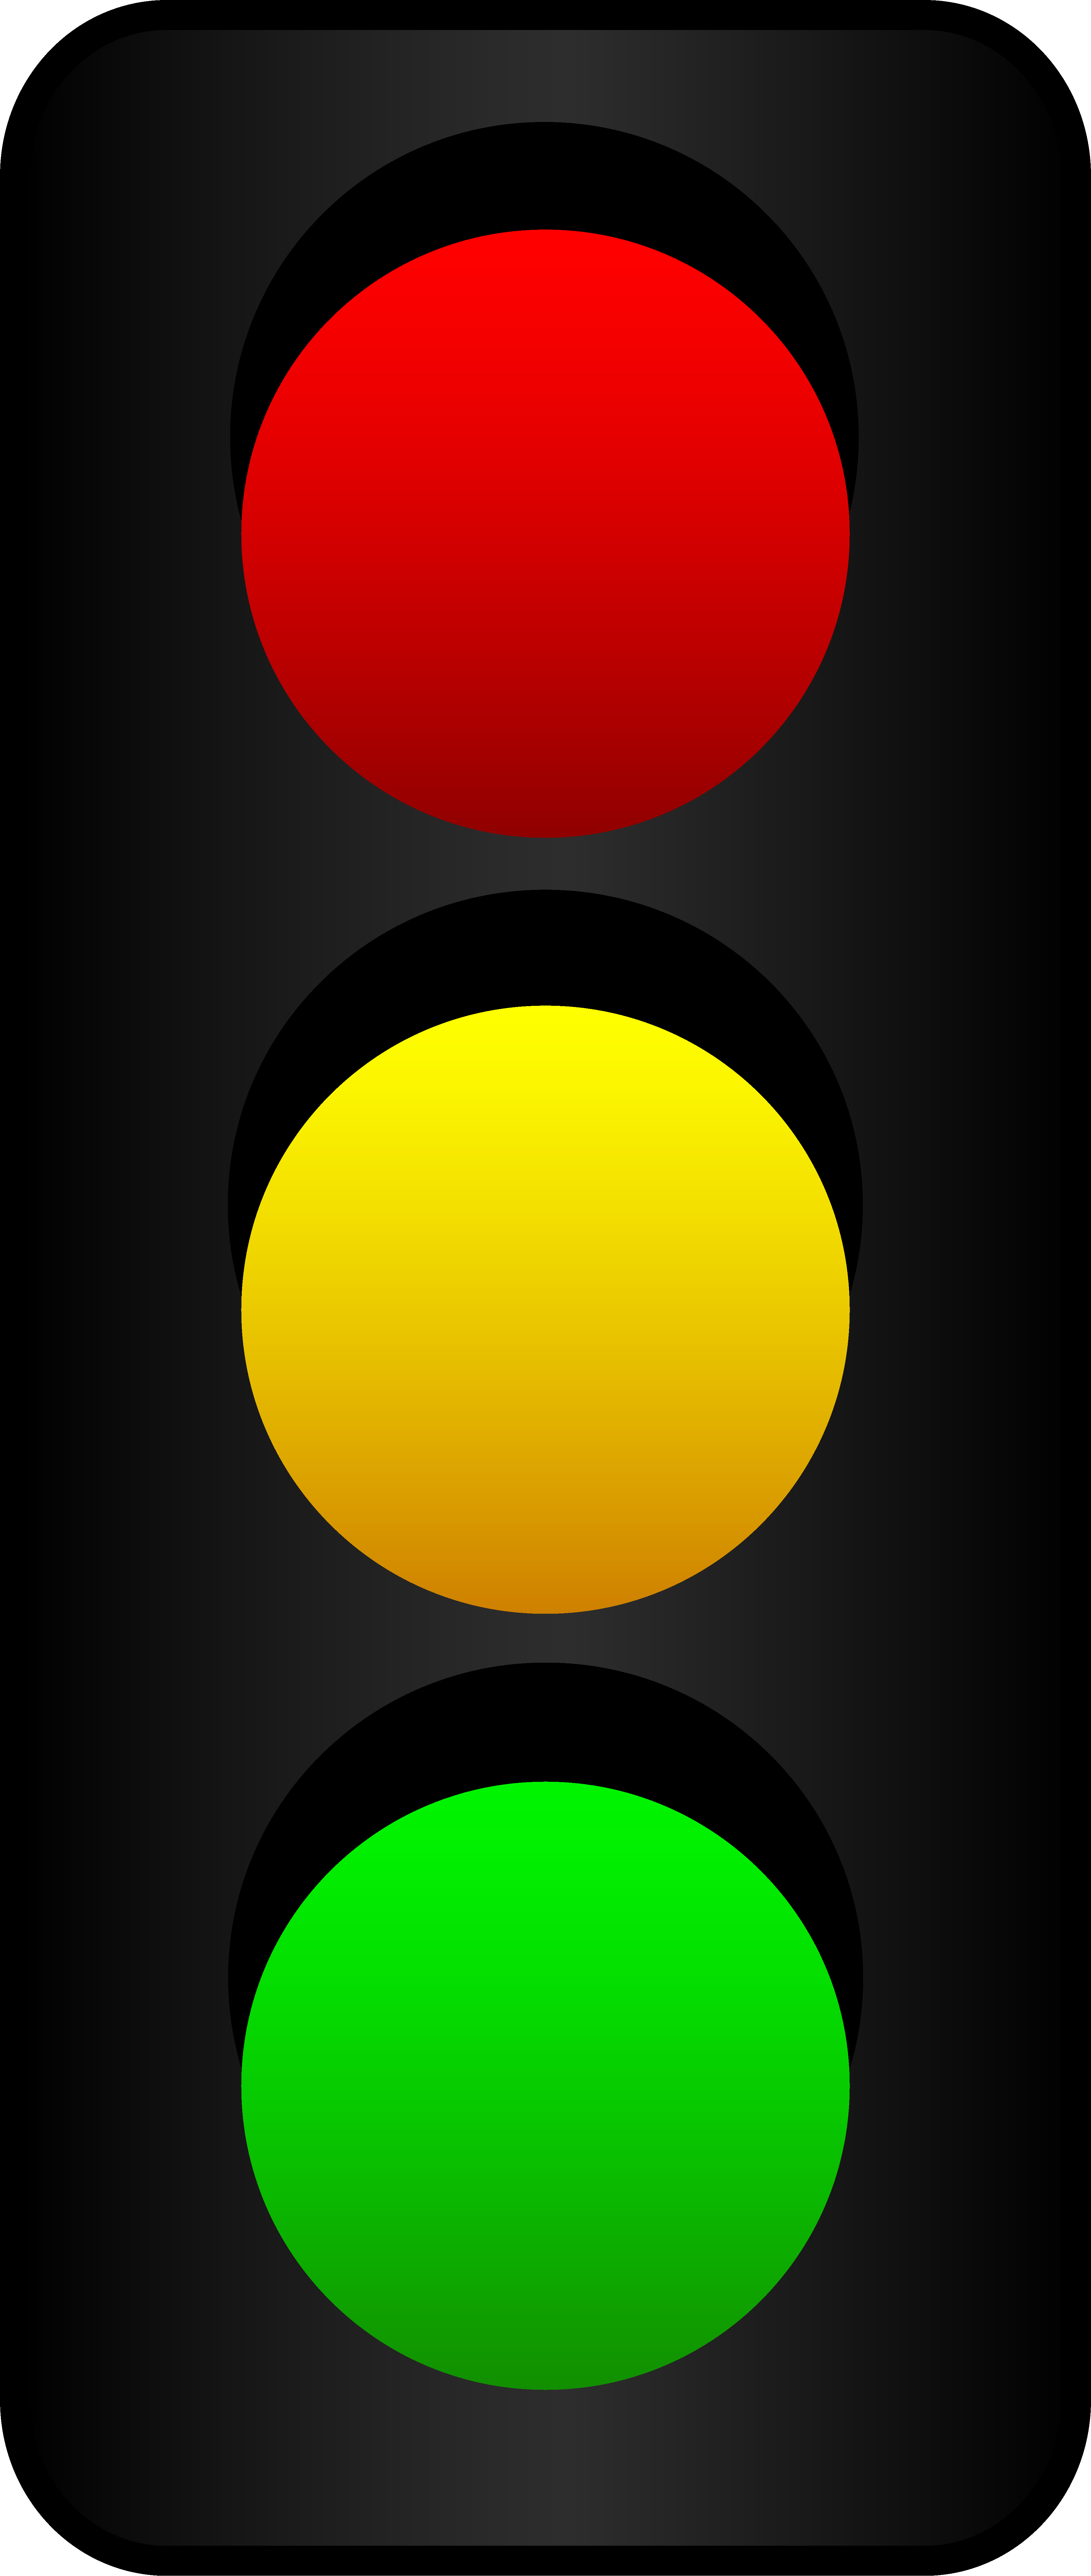 Traffic Light Clip Art Images  Pictures - Becuo